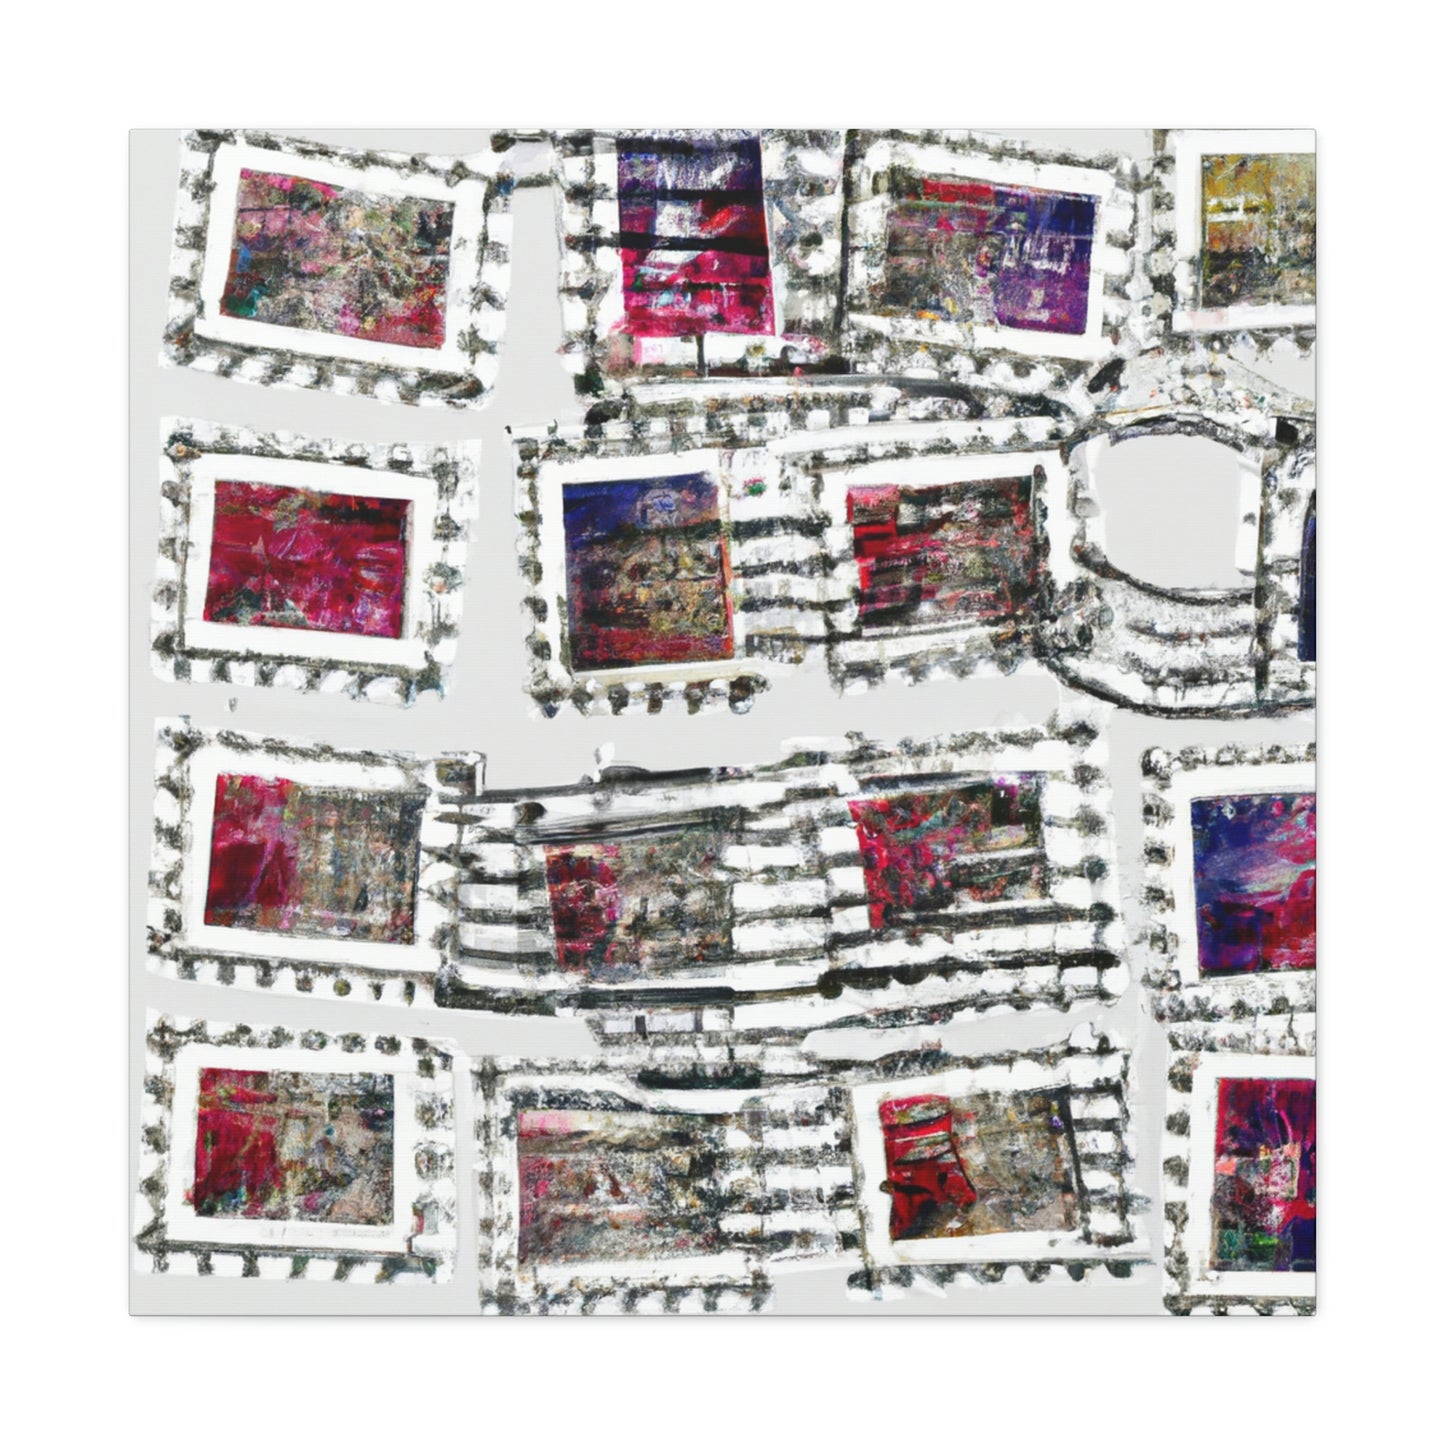 Global Celebration Stamps - Postage Stamp Collector Canvas Wall Art